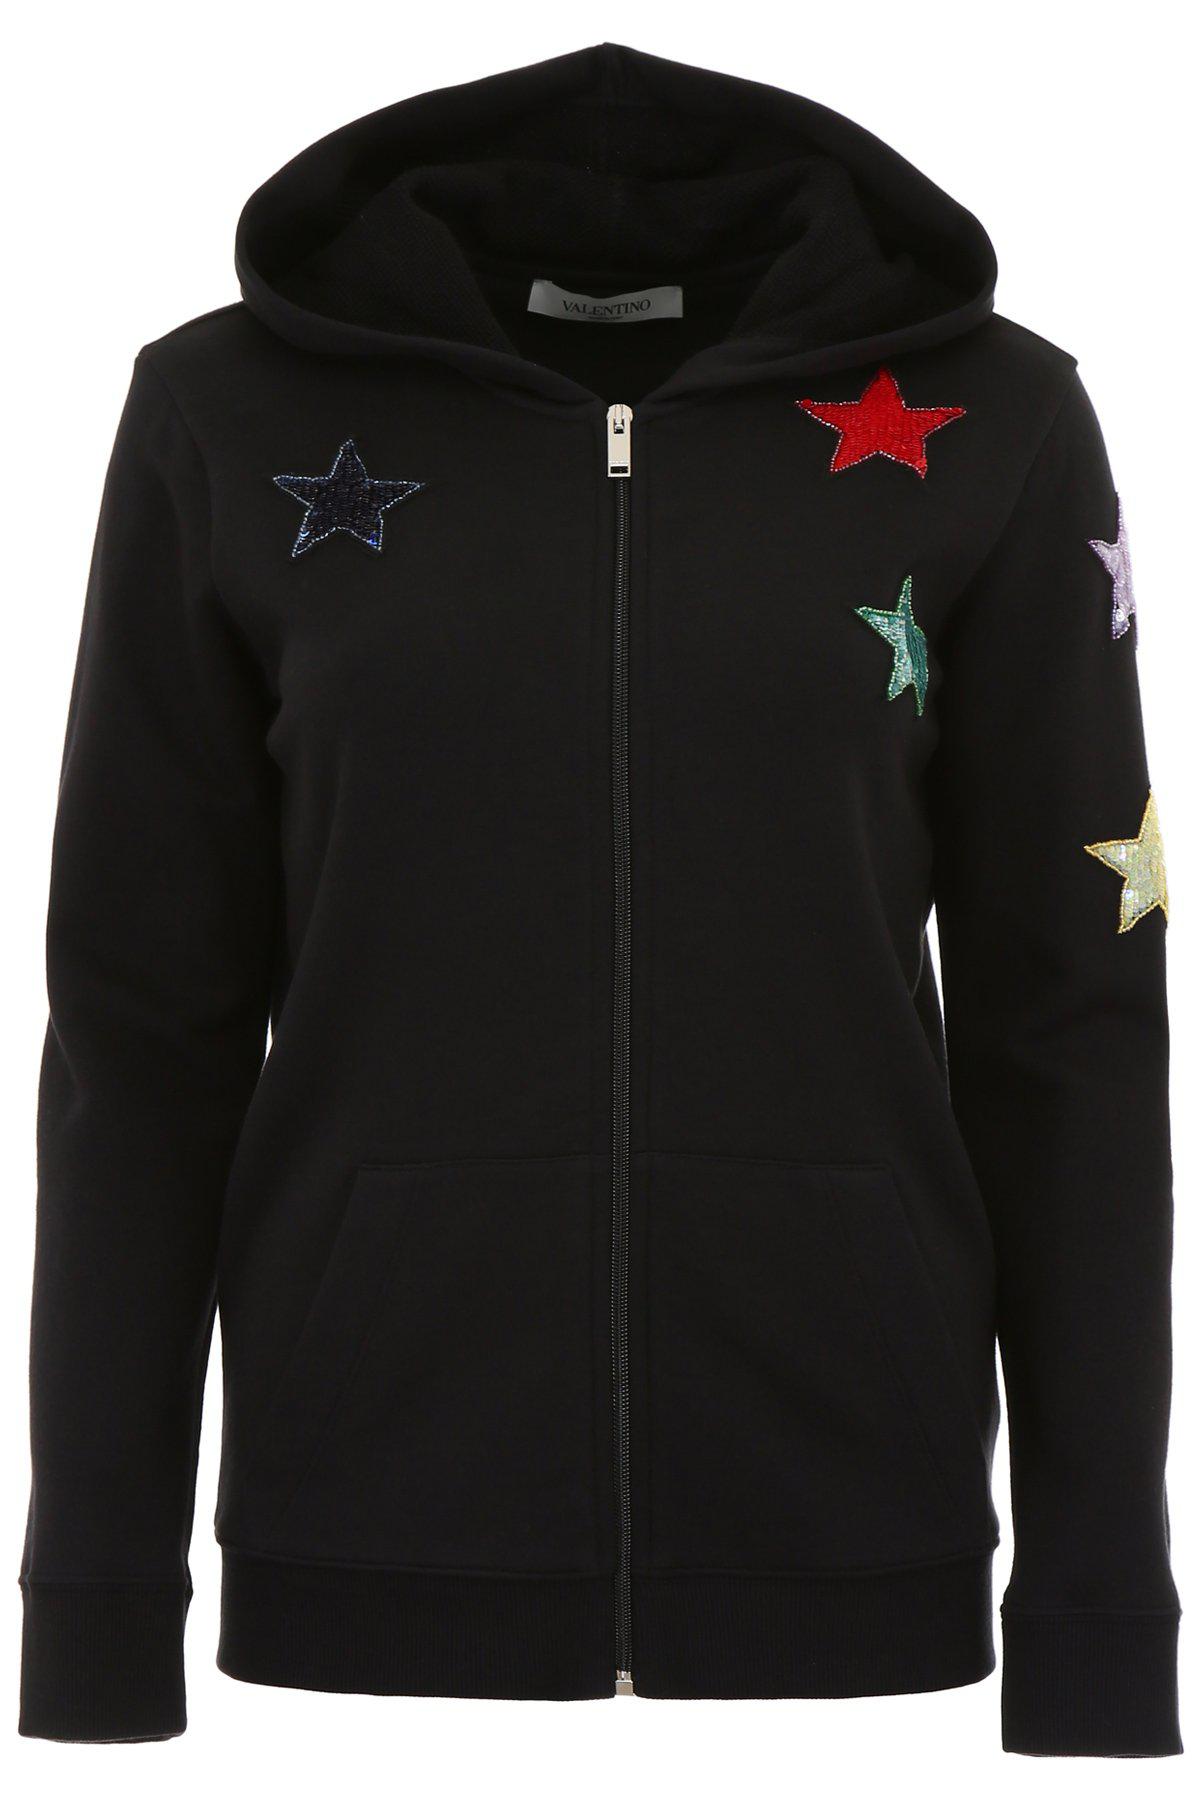 Valentino Synthetic Star Embroidered Hoodie in Black - Lyst